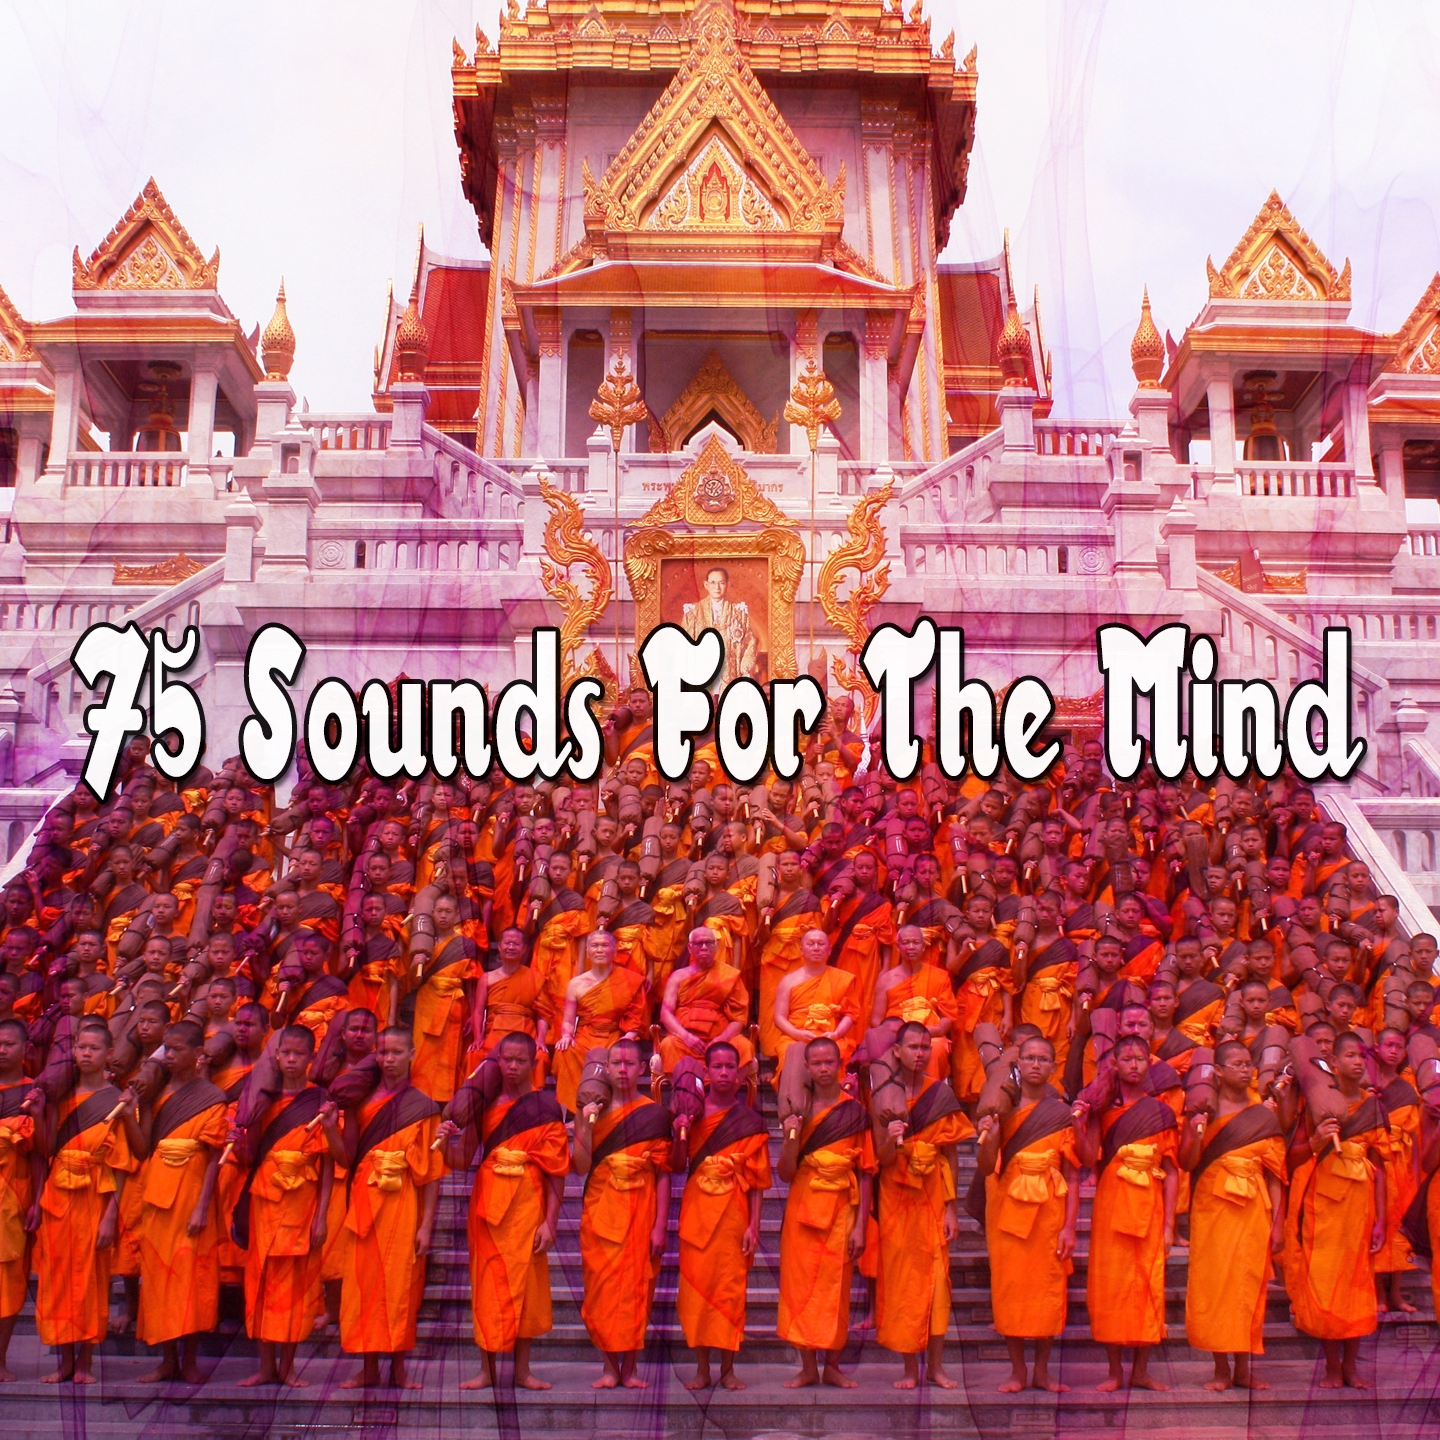 75 Sounds For The Mind